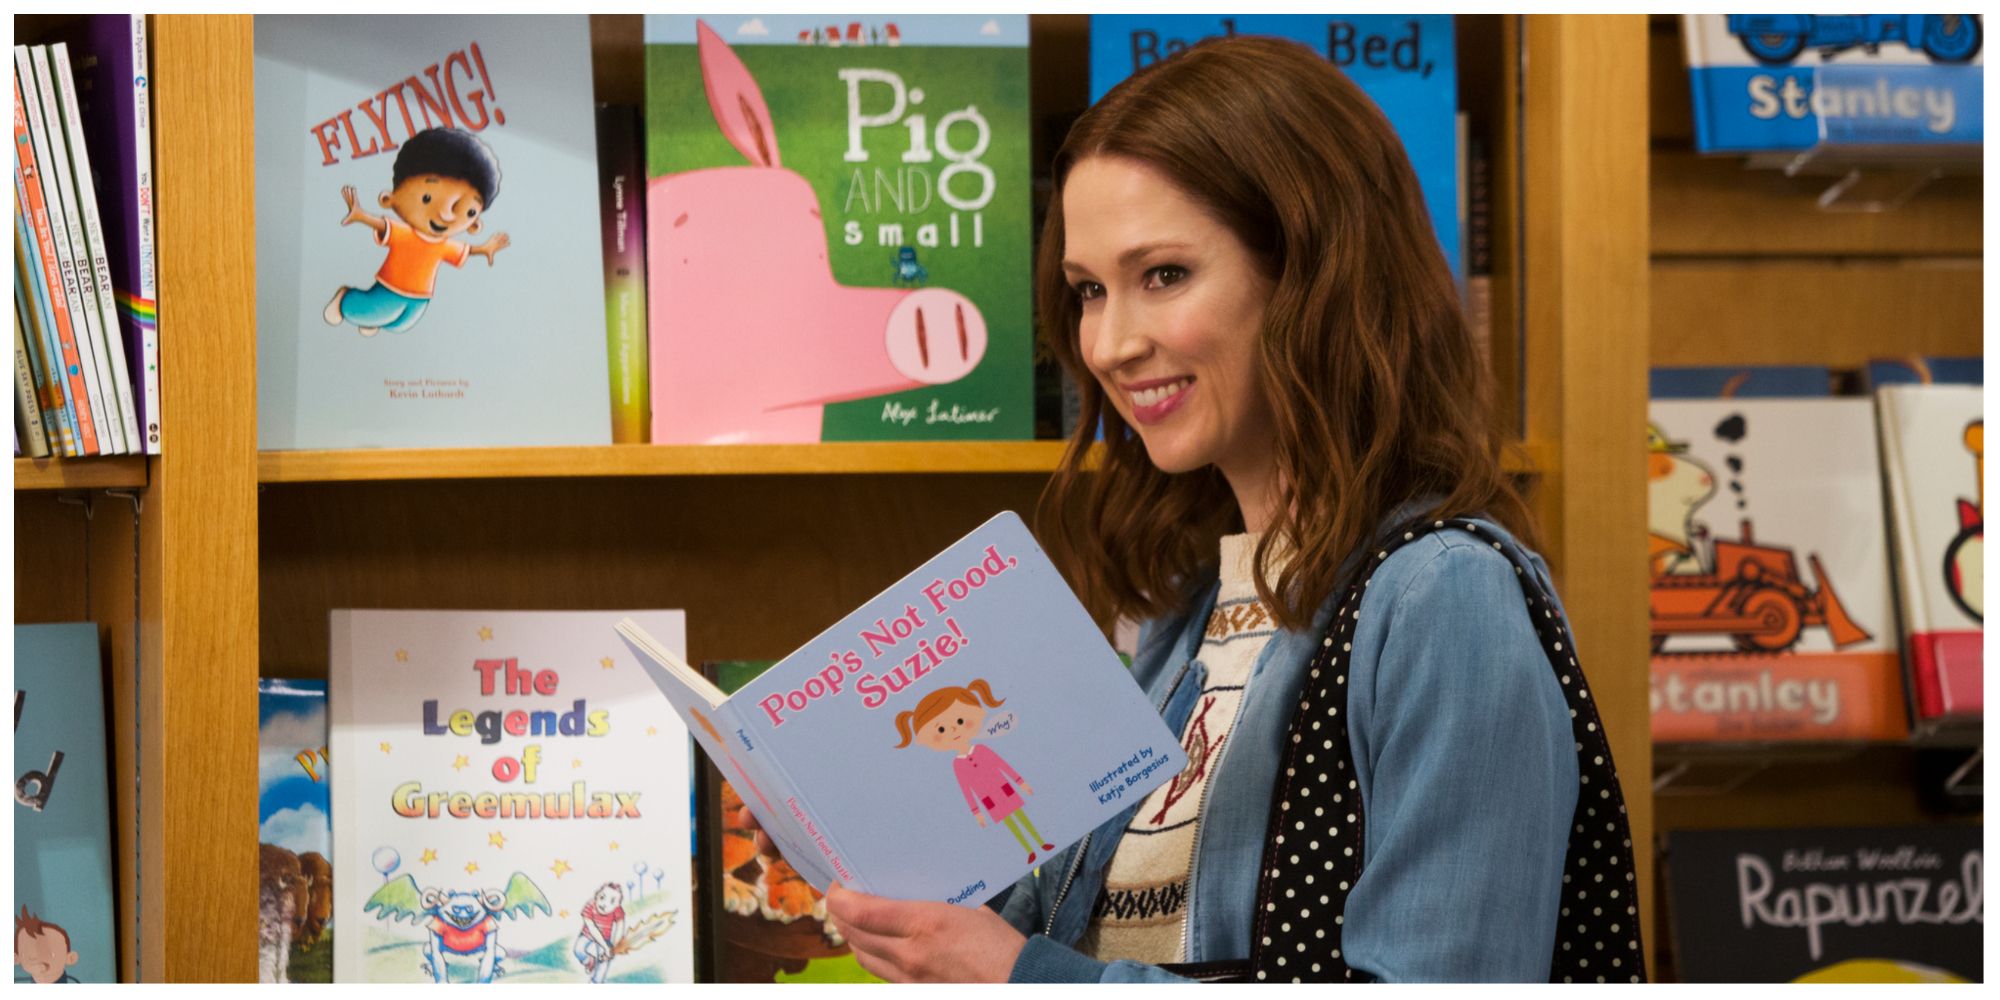 Kimmy smiling whilst holding a book in the children's section of a bookstore 